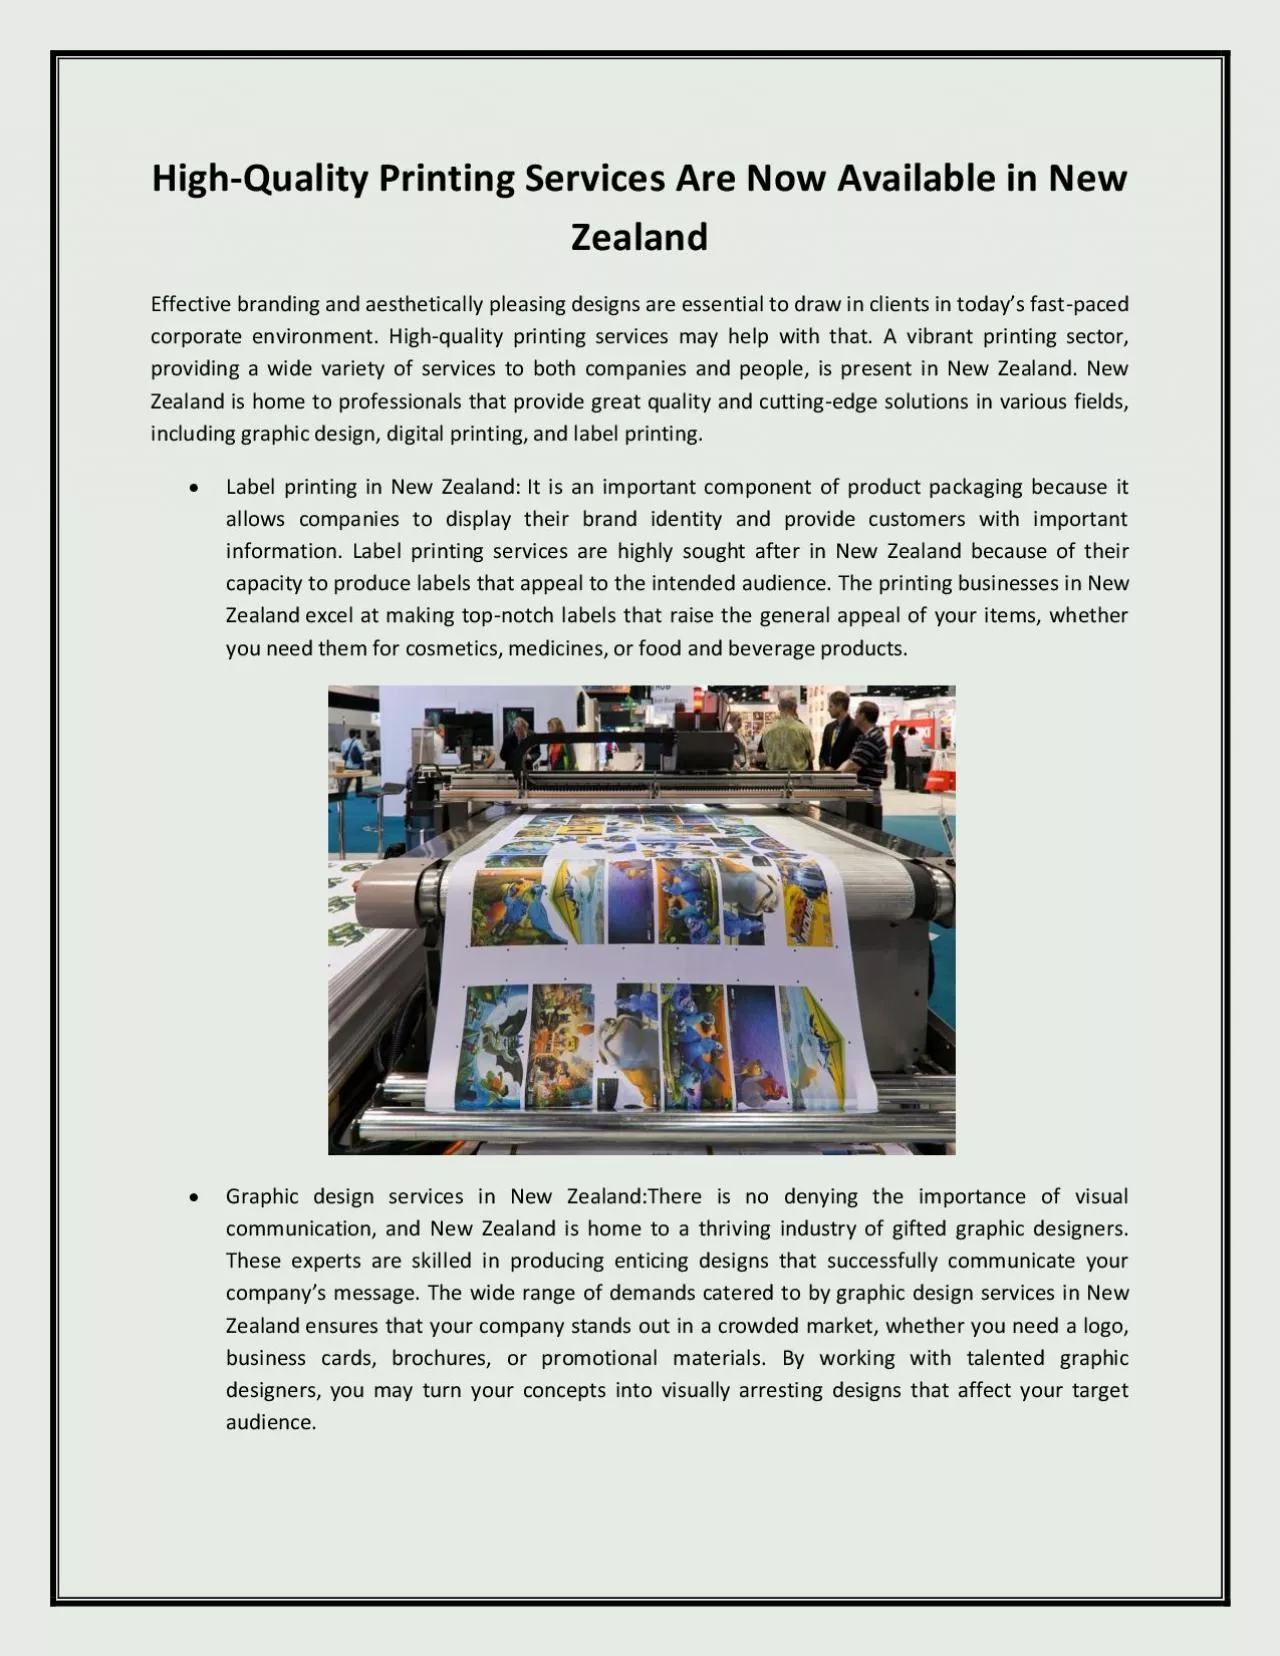 High-Quality Printing Services Are Now Available in New Zealand